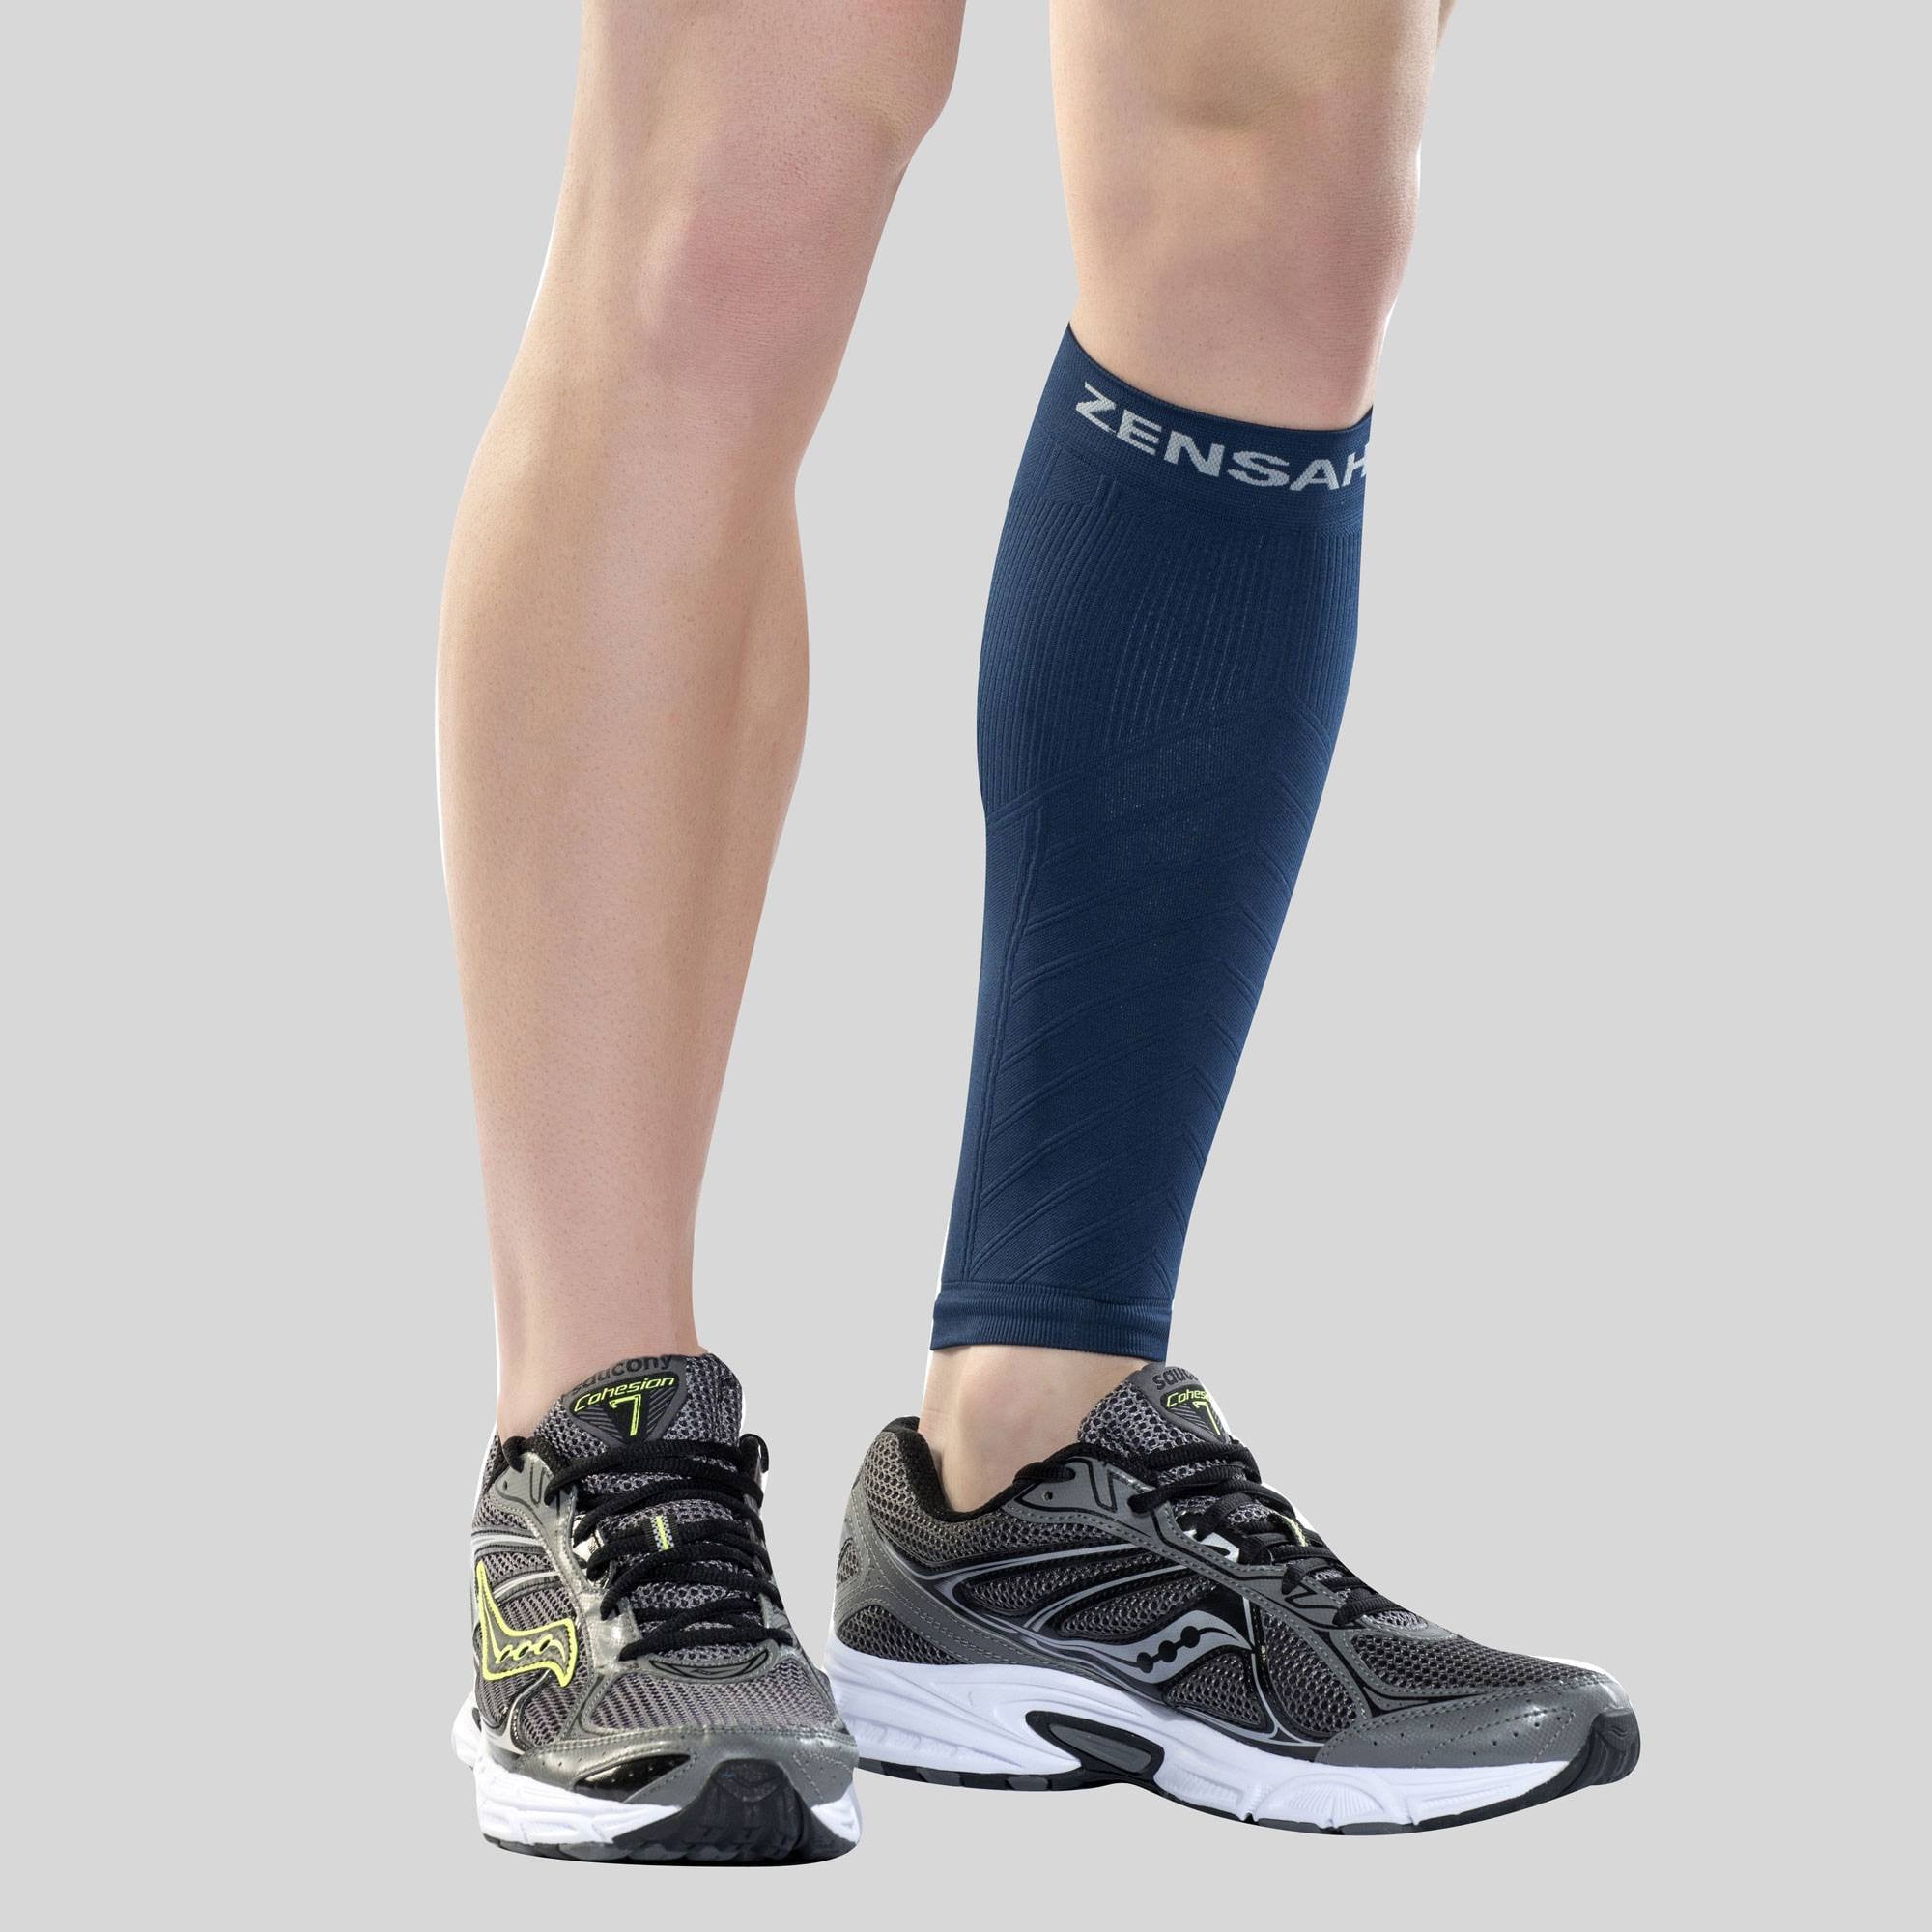 Zensah Compression Ankle/Calf Sleeves